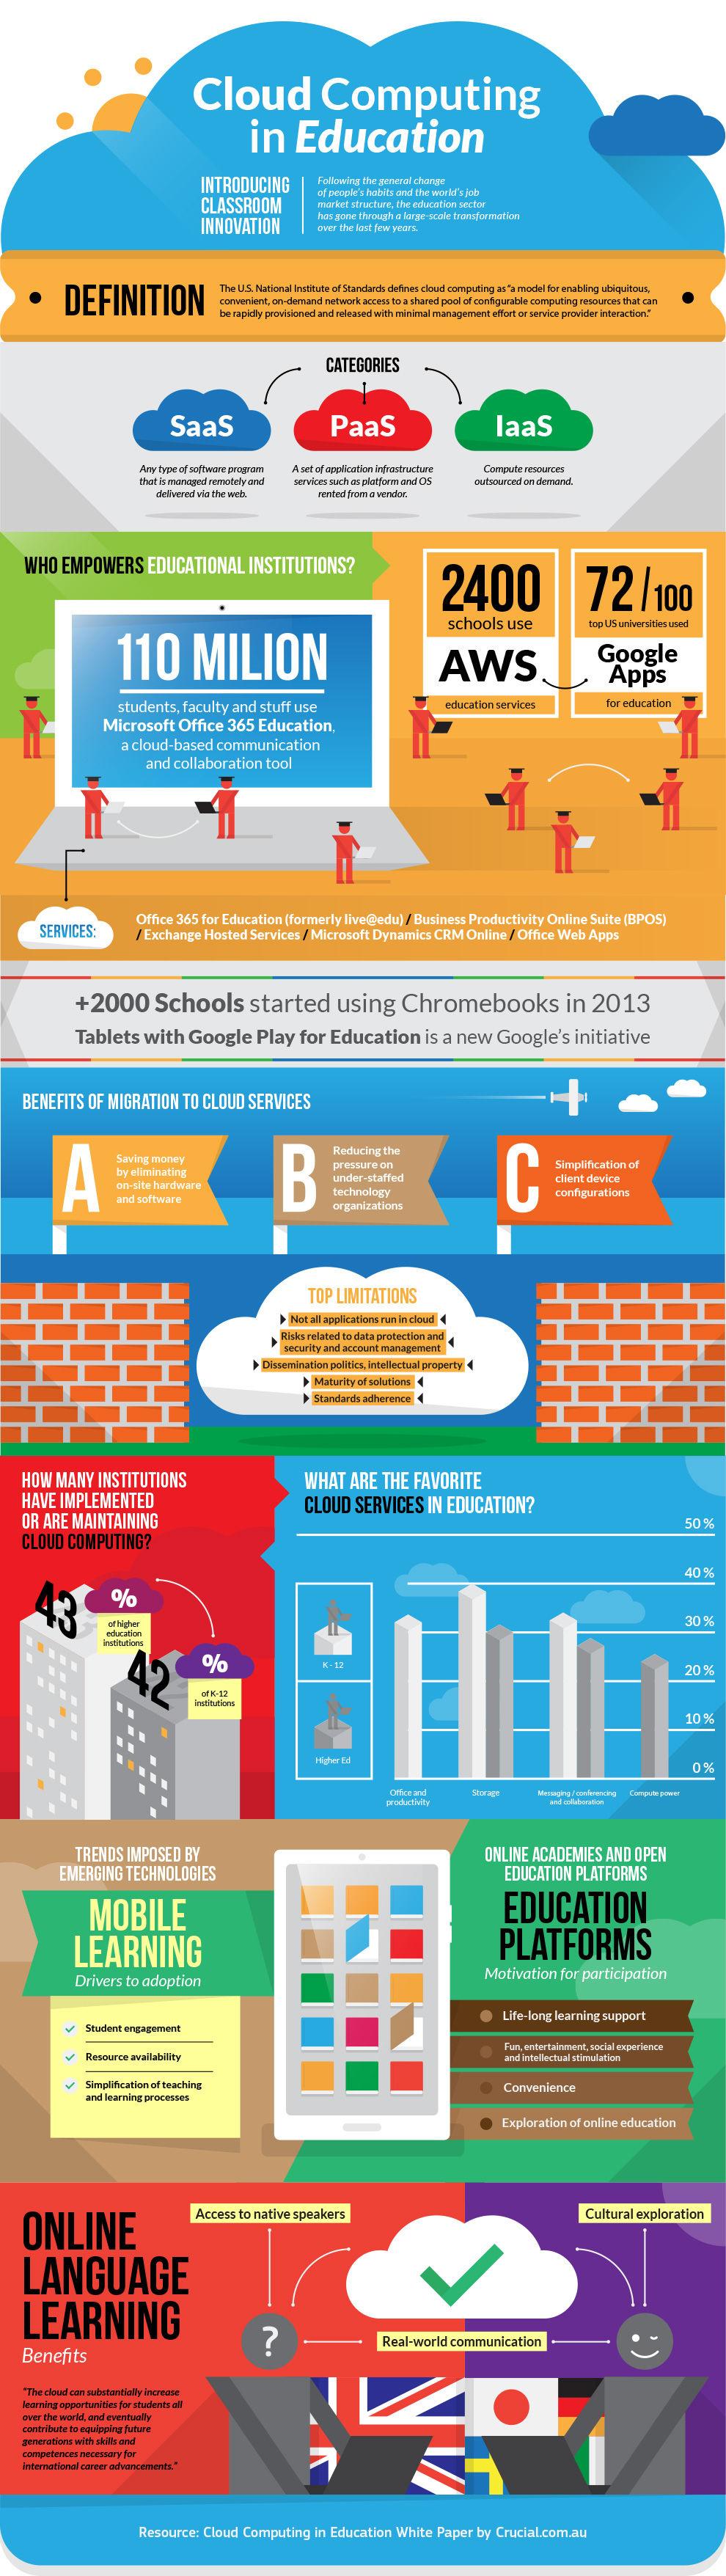 Cloud-computing-in-education-infographic